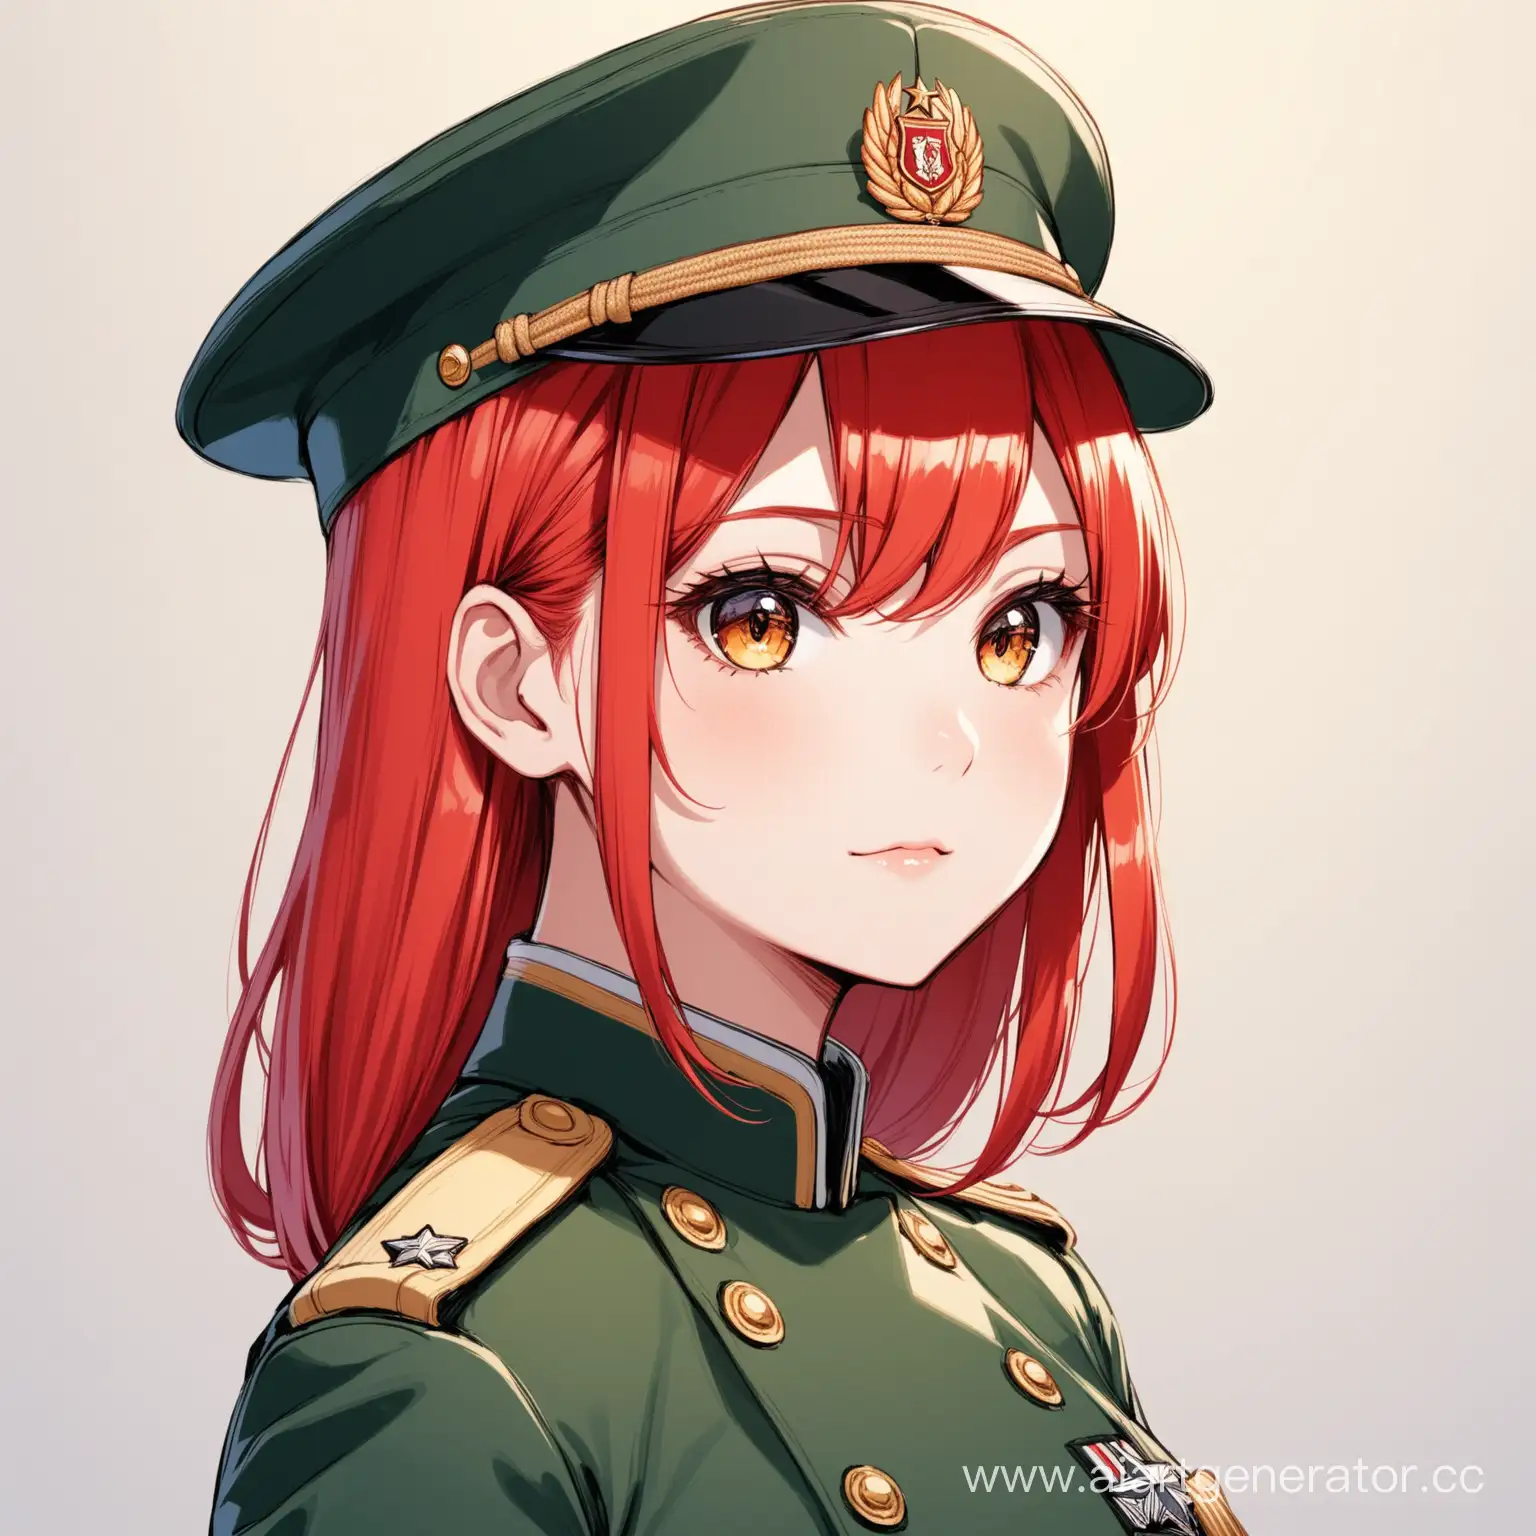 RedHaired-Girl-in-Military-Uniform-and-Cap